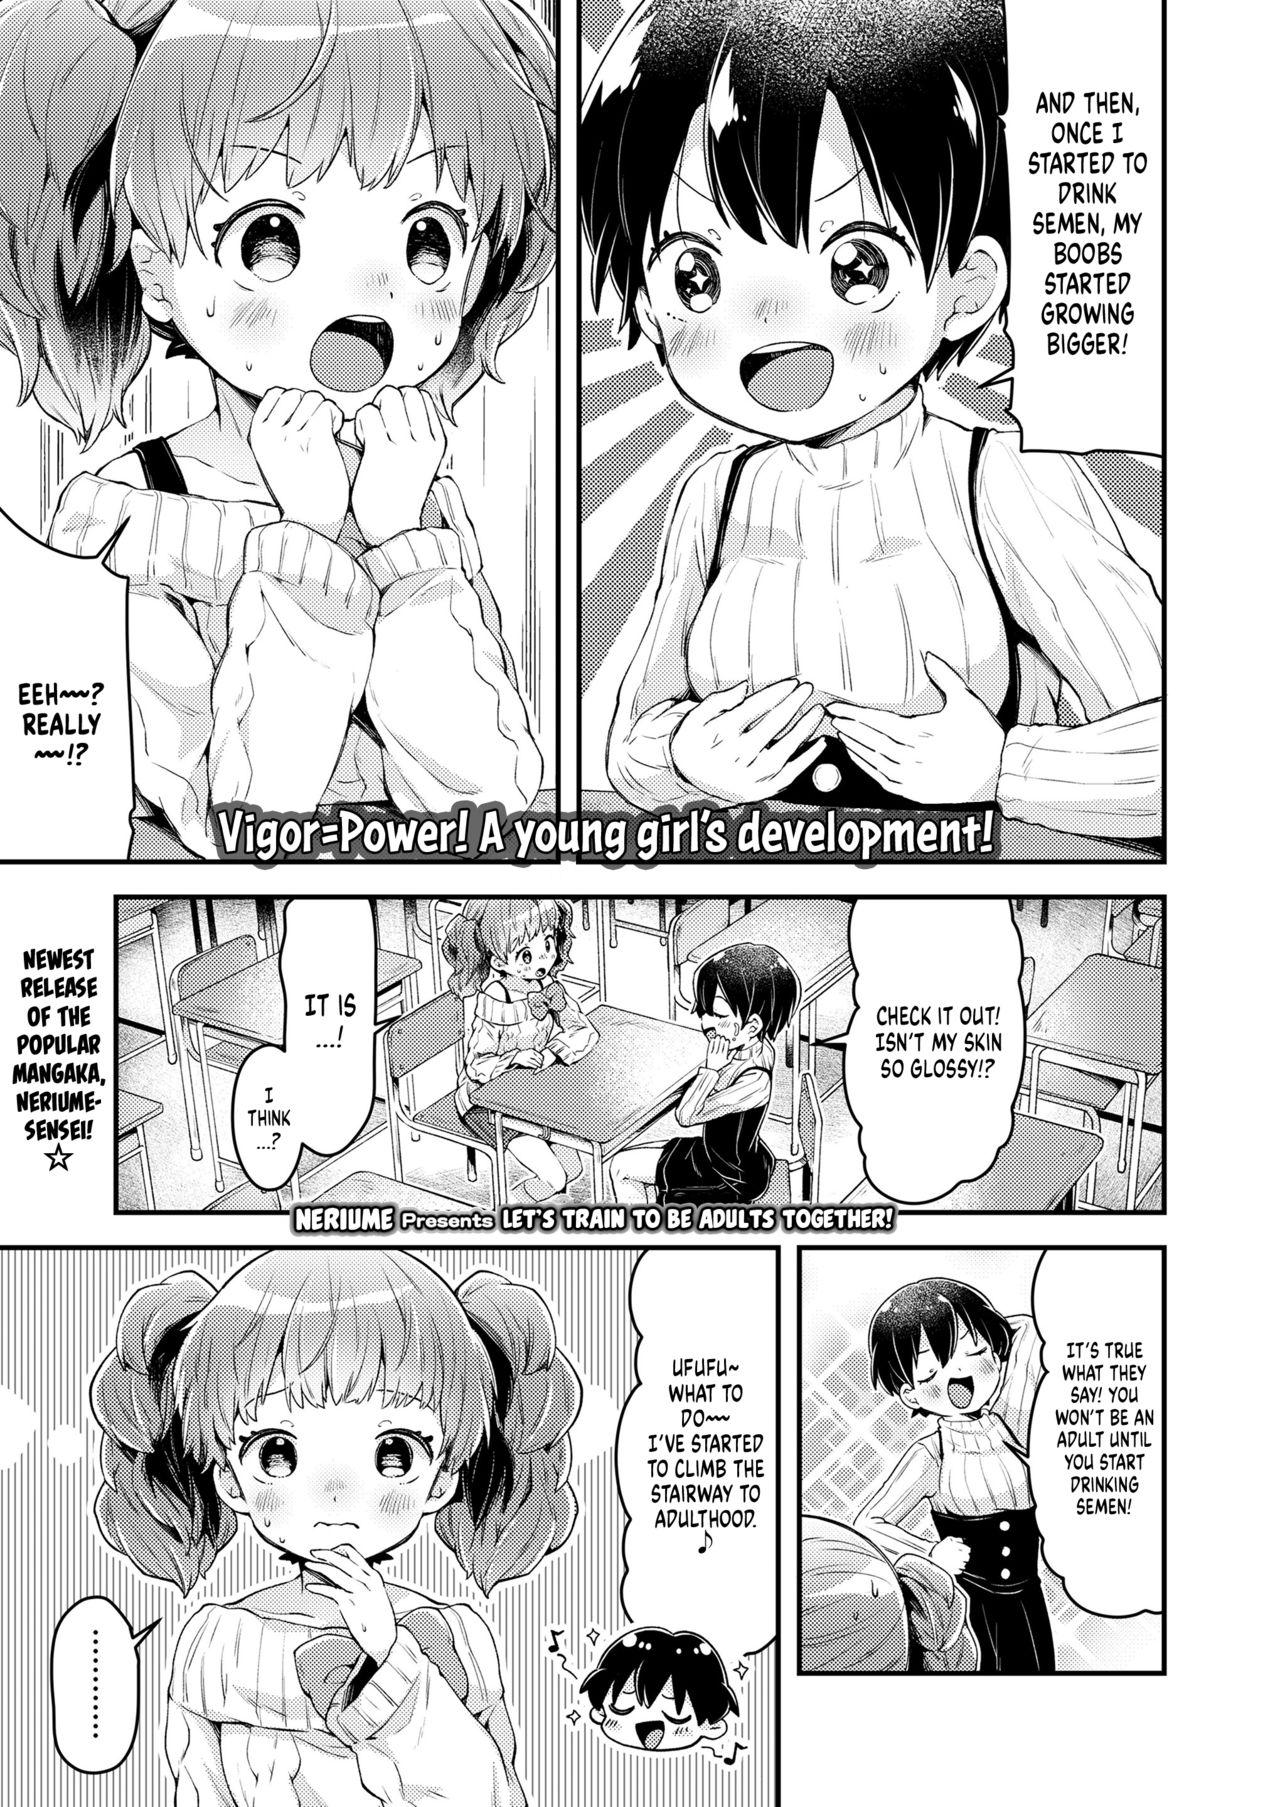 Love Issho ni Otona Training! | Let's Train to be Adults Together! Bwc - Page 1